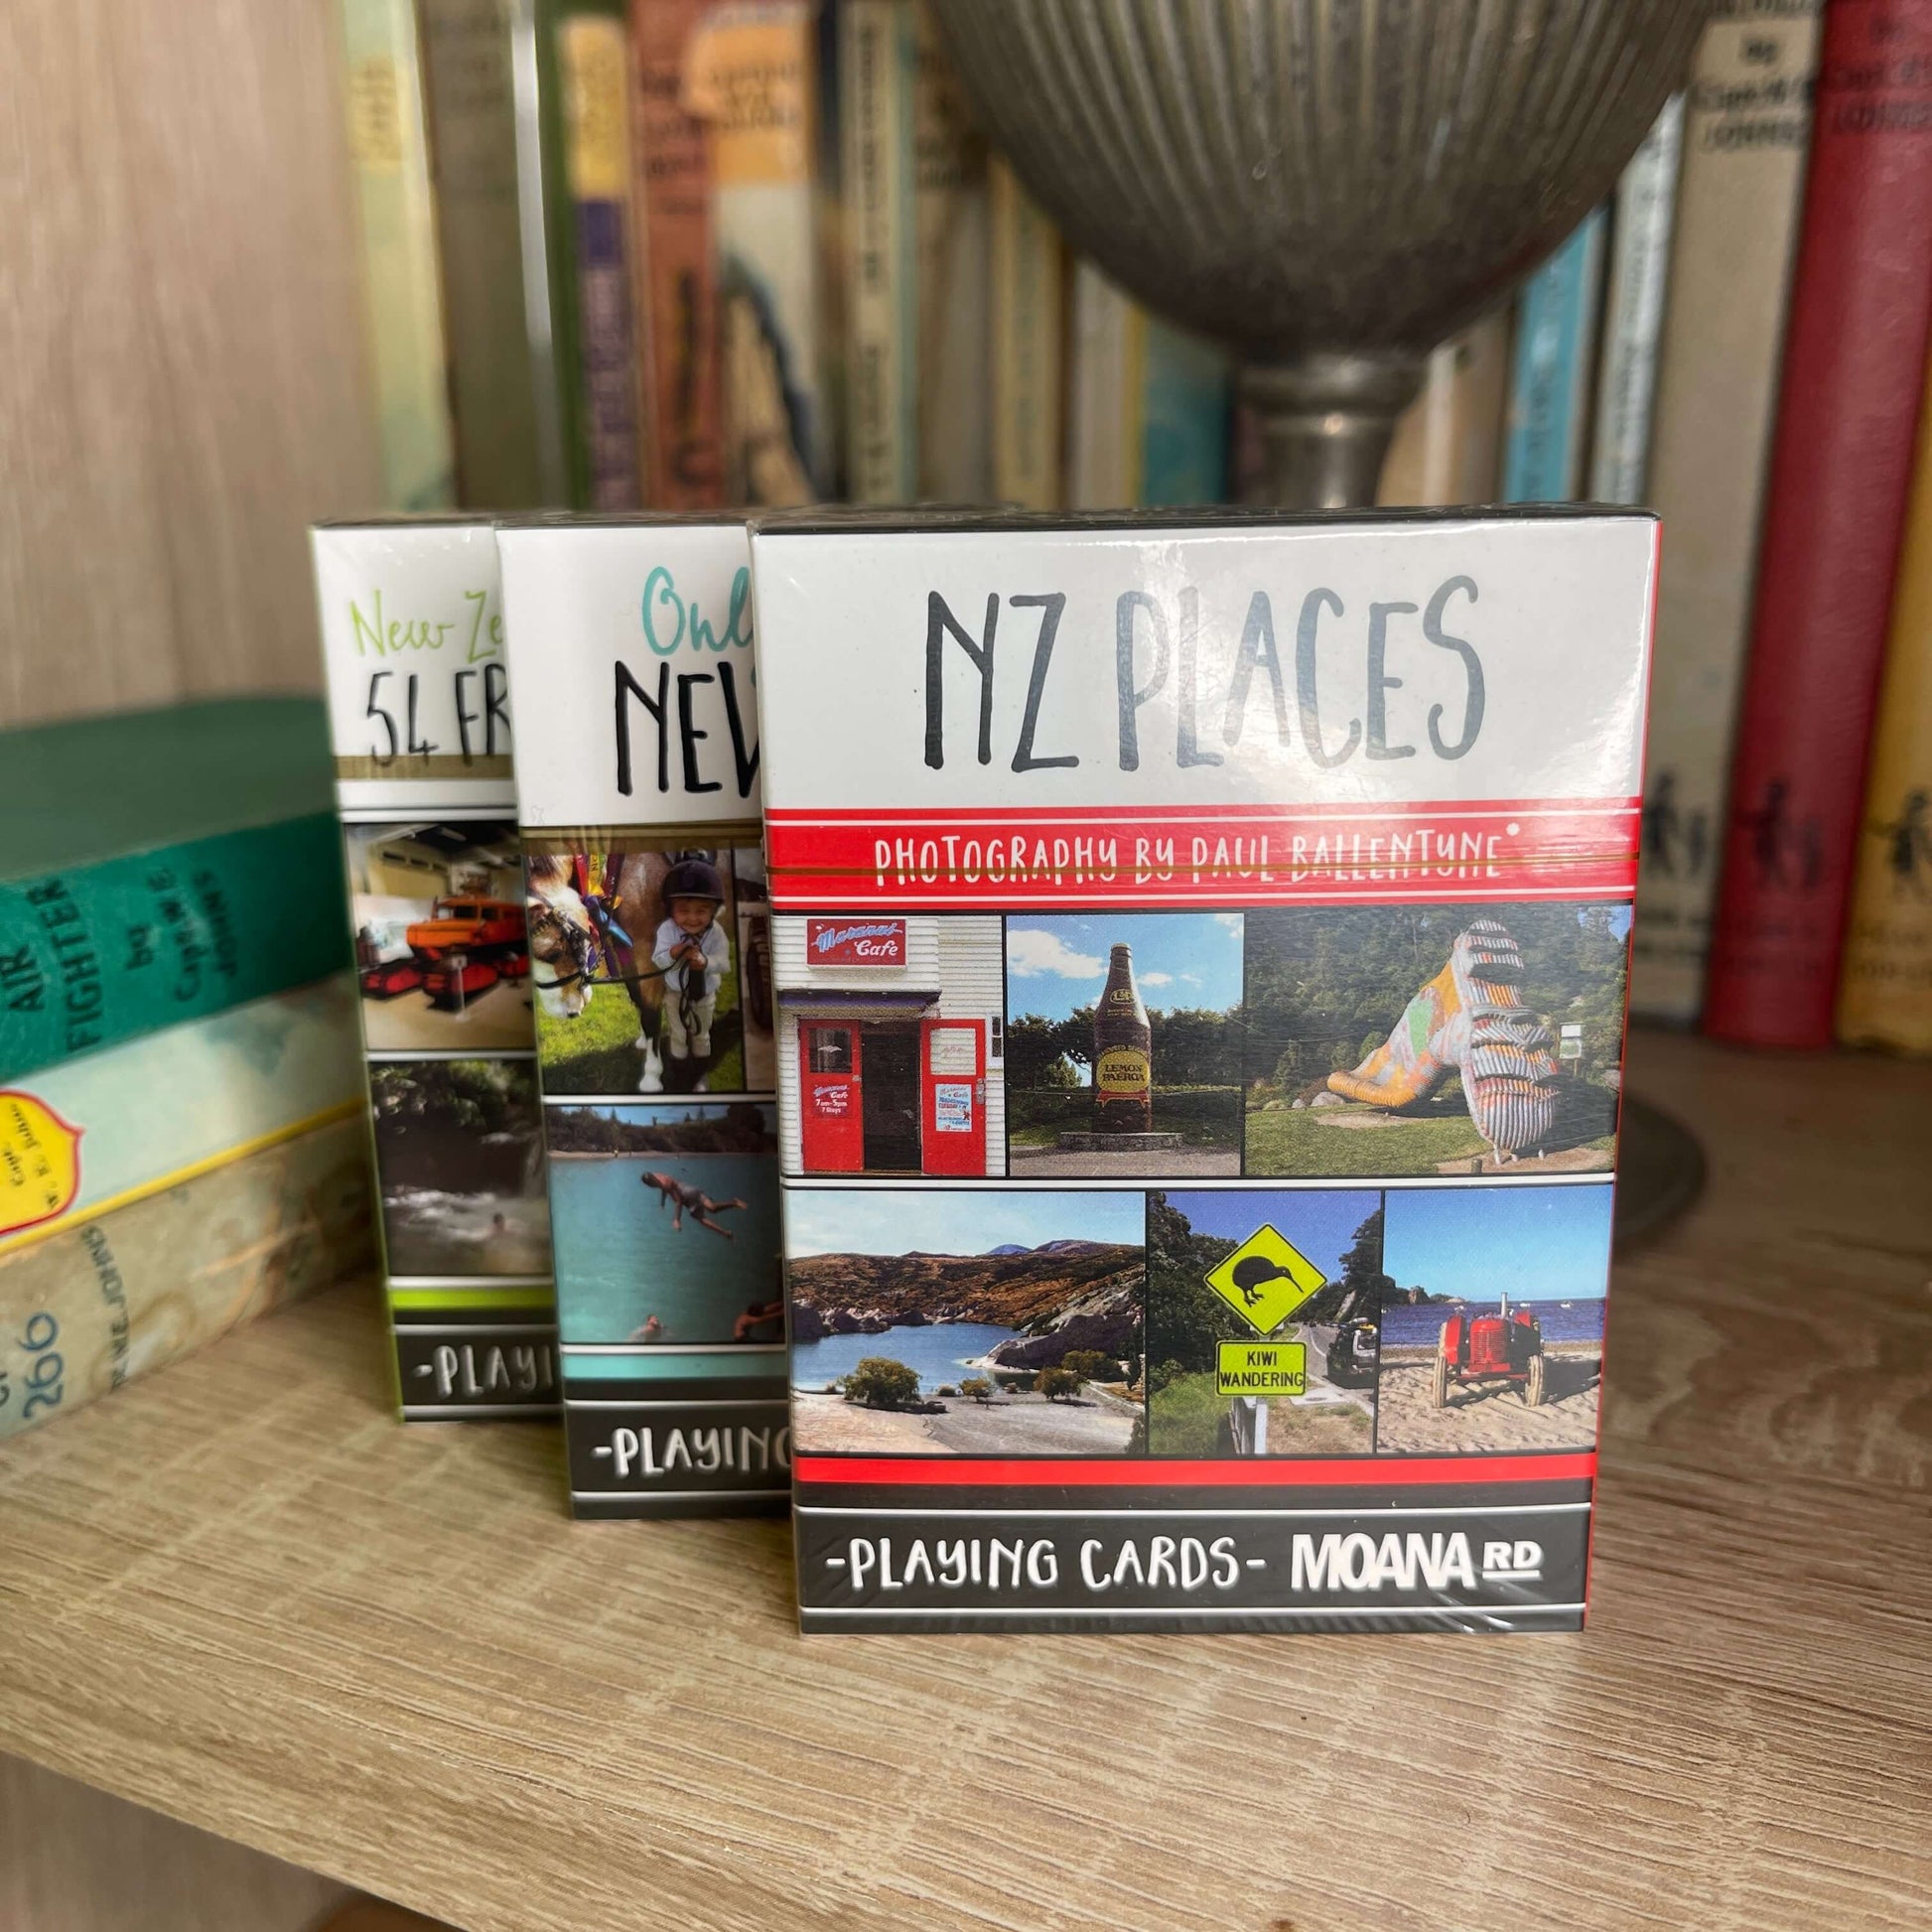 Pack of playing cards featuring NZ places sitting on a book shelf with other card packs behind it.